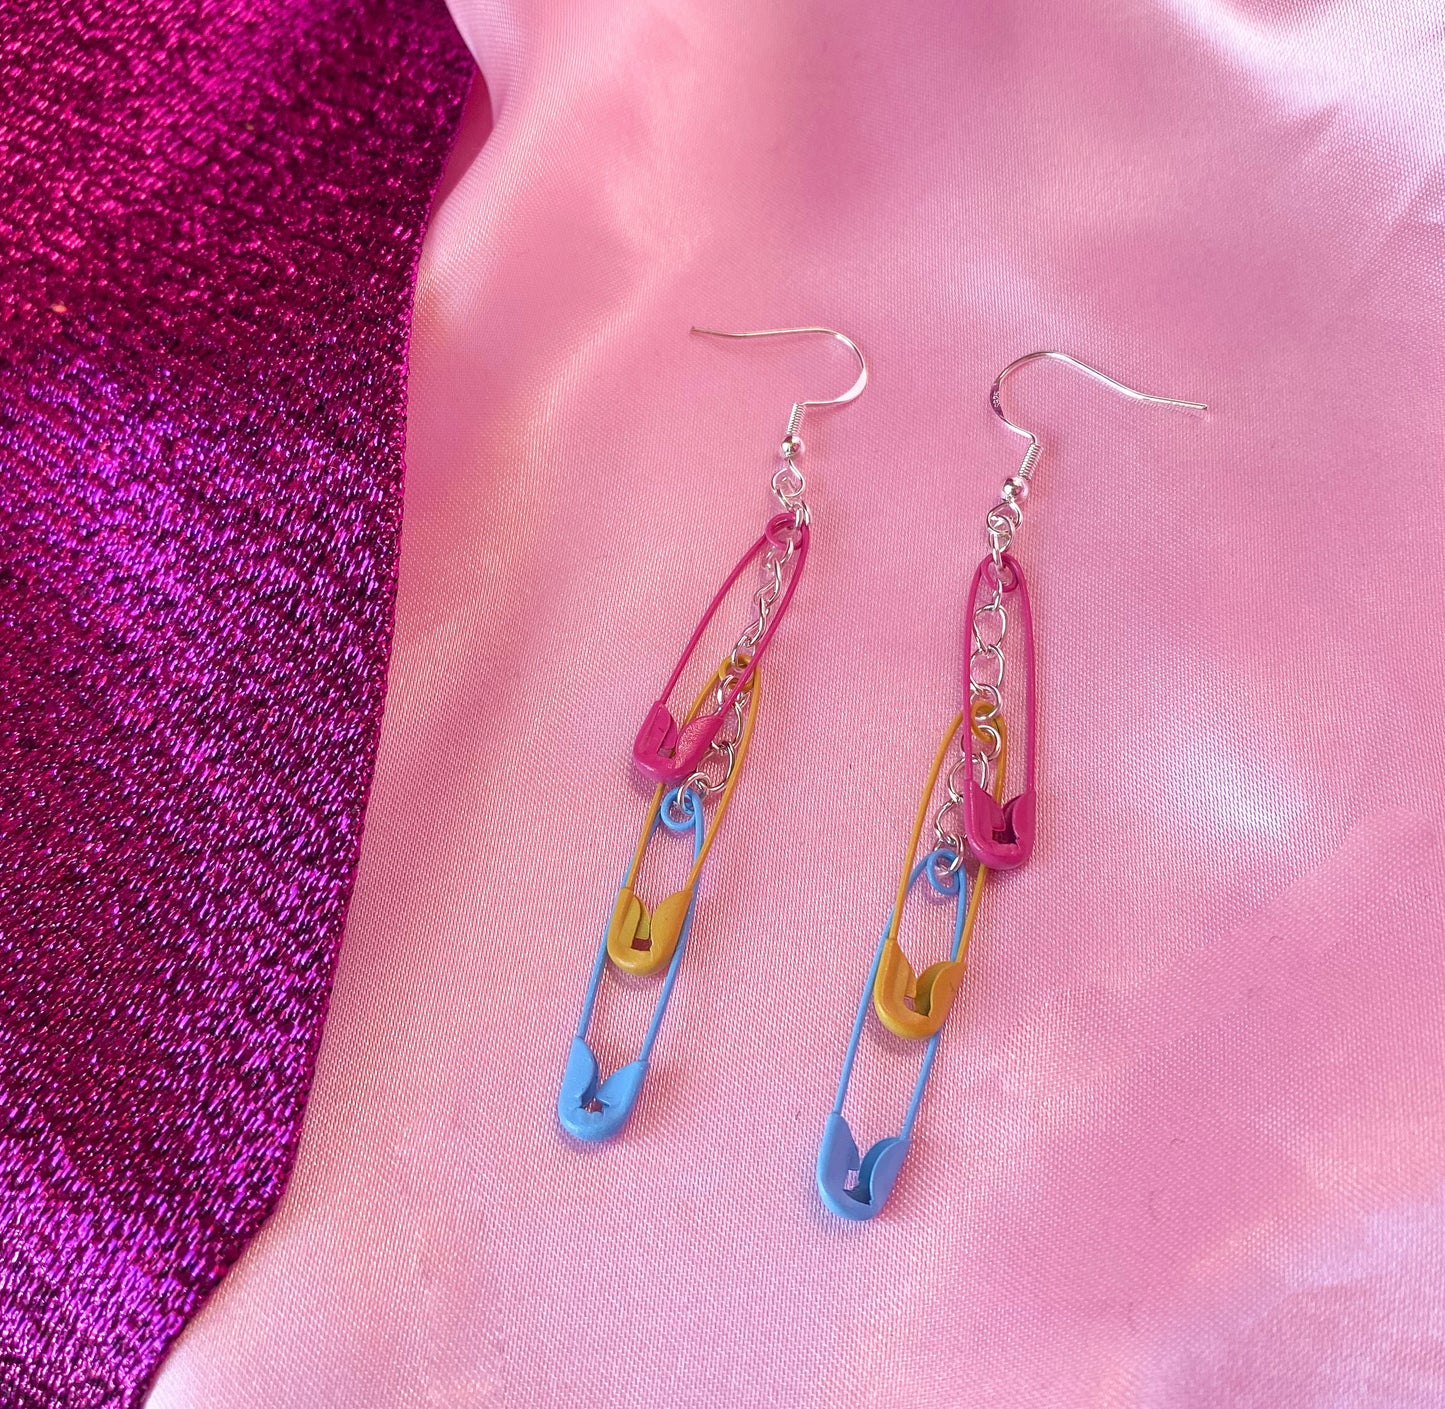 Pansexual pride flag safety pin earrings